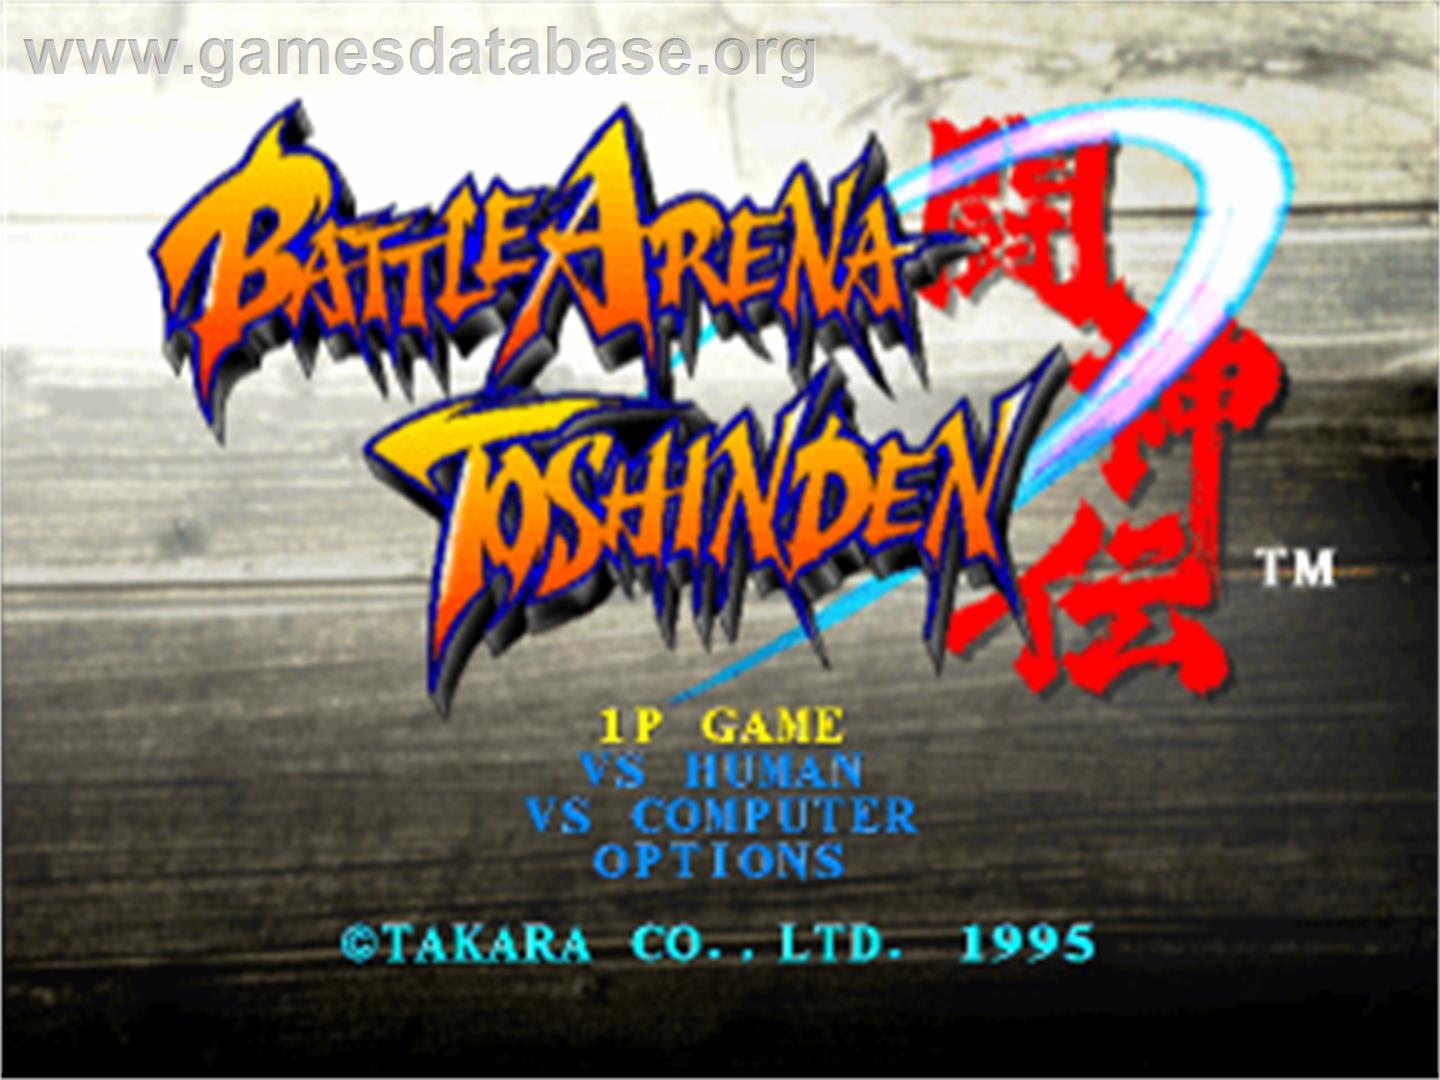 Battle Arena Toshinden - Sony Playstation - Artwork - Title Screen